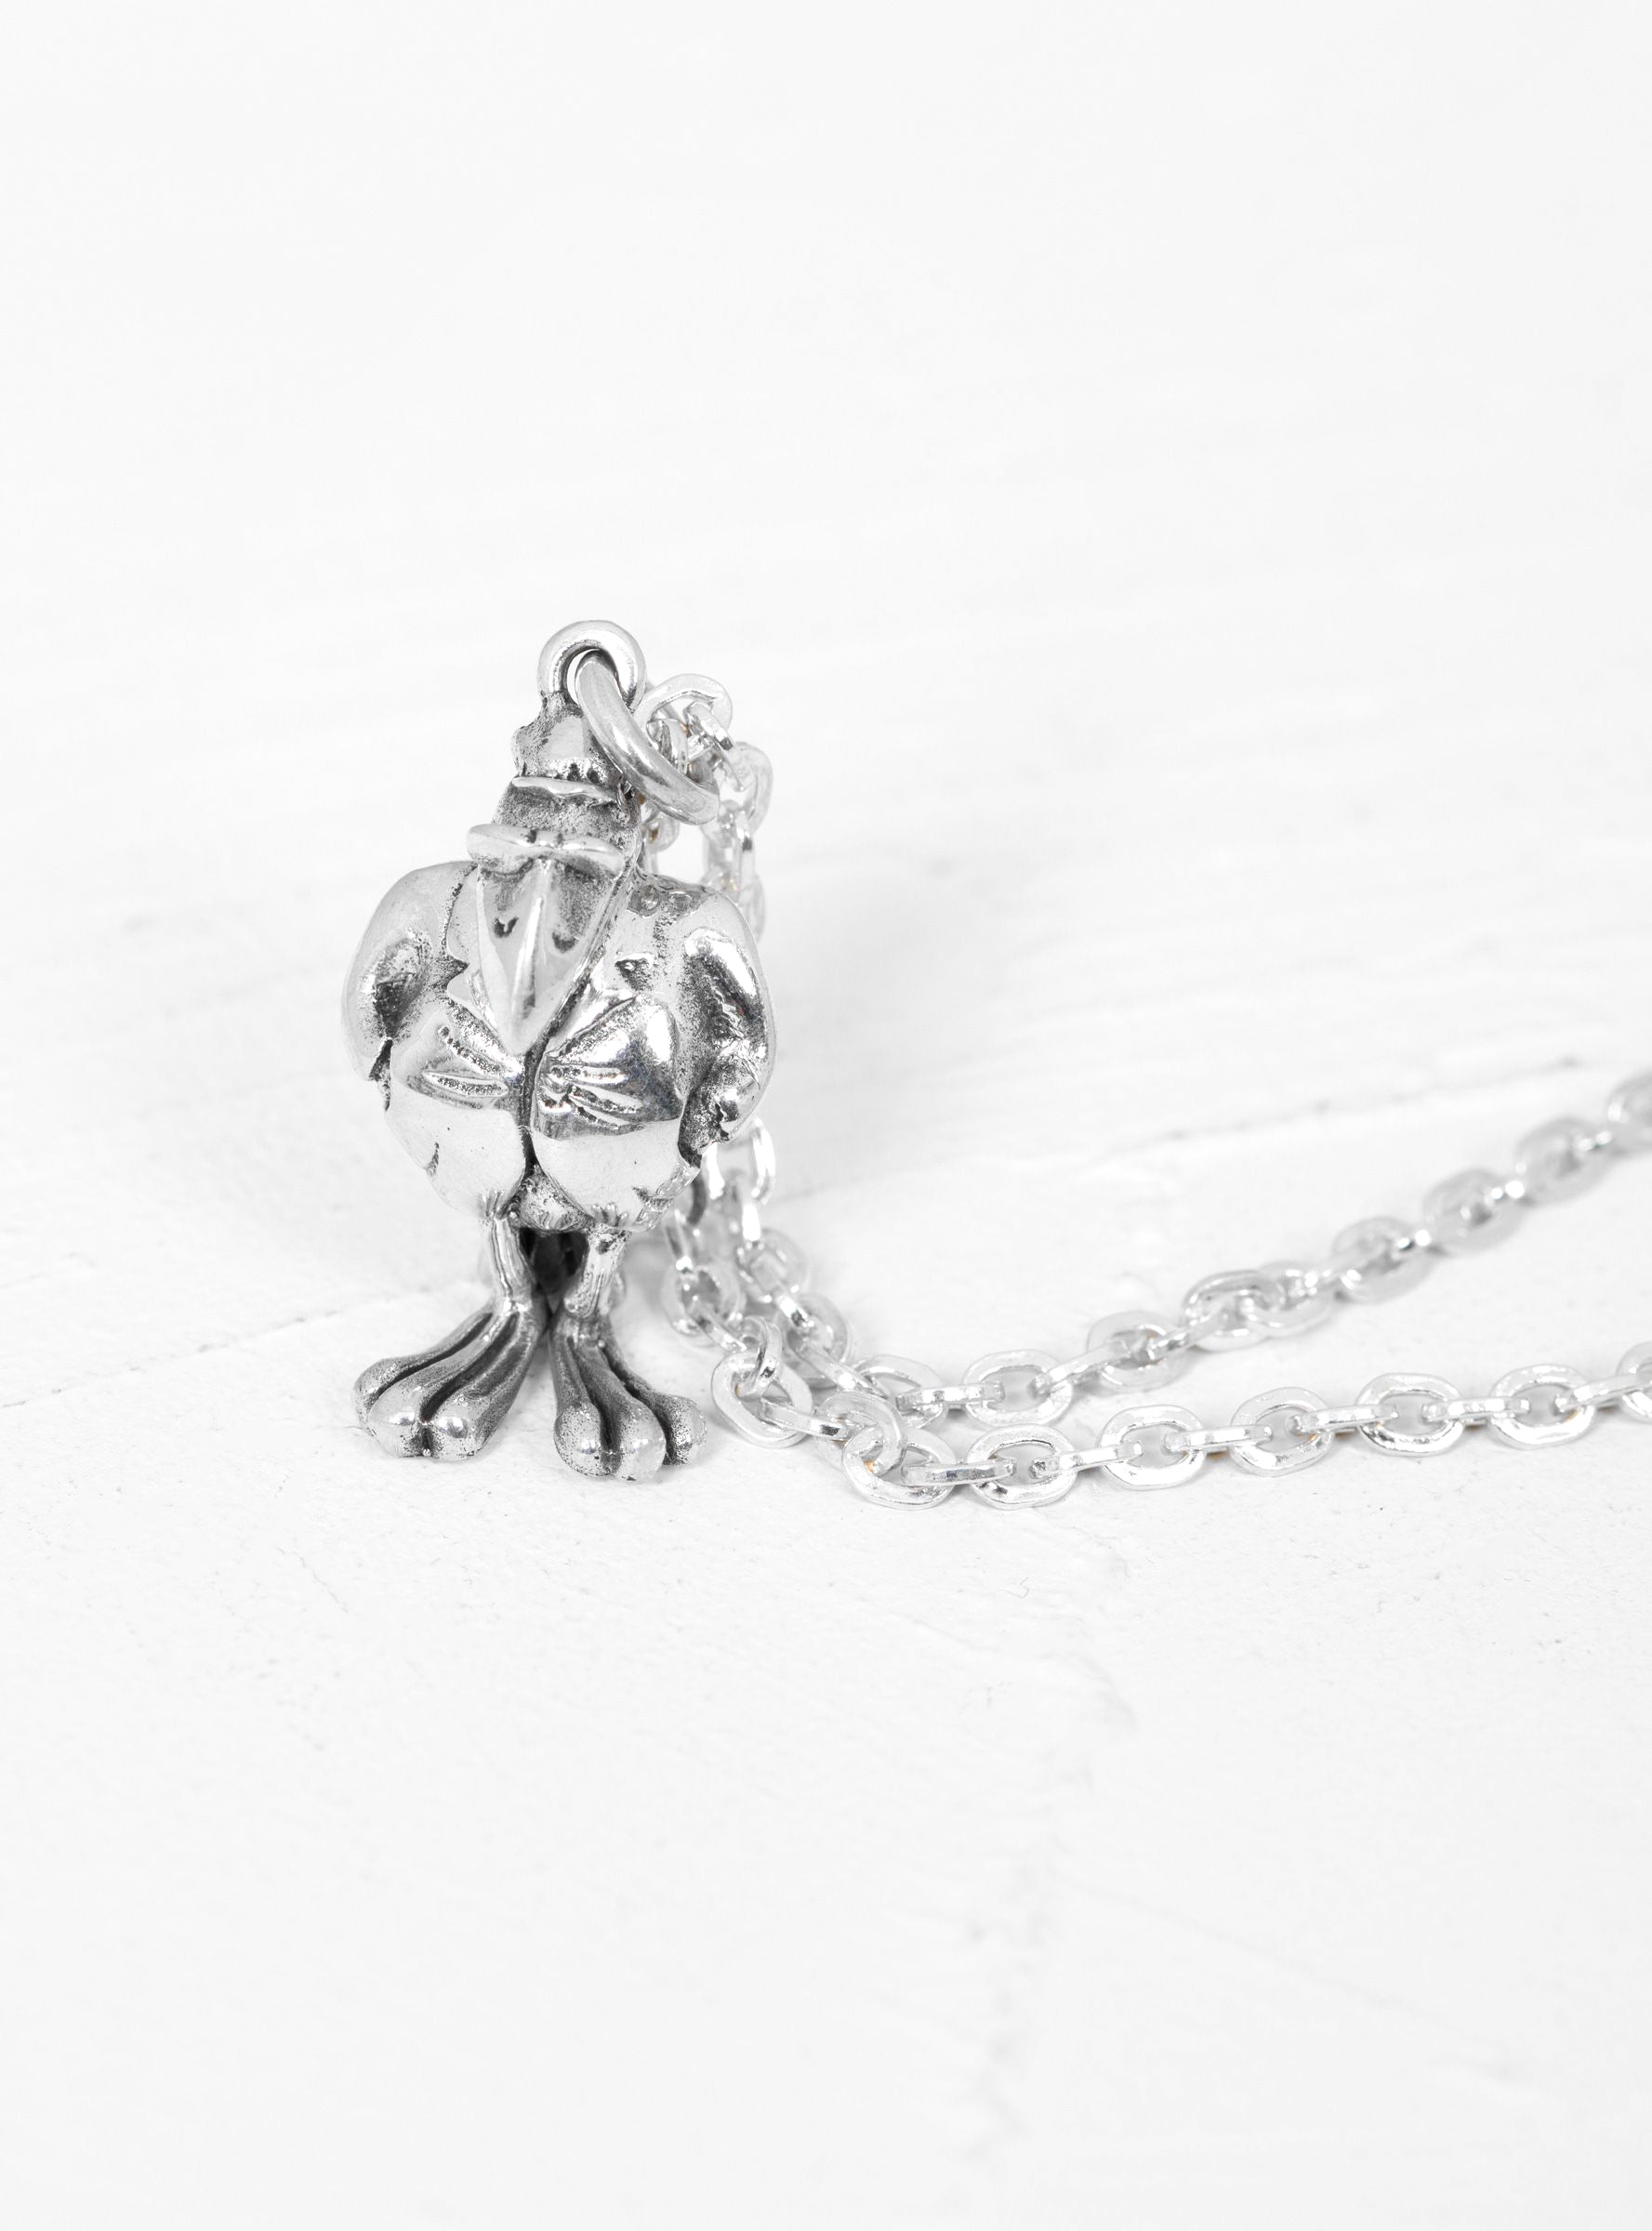  Maple The Crow Necklace Silver